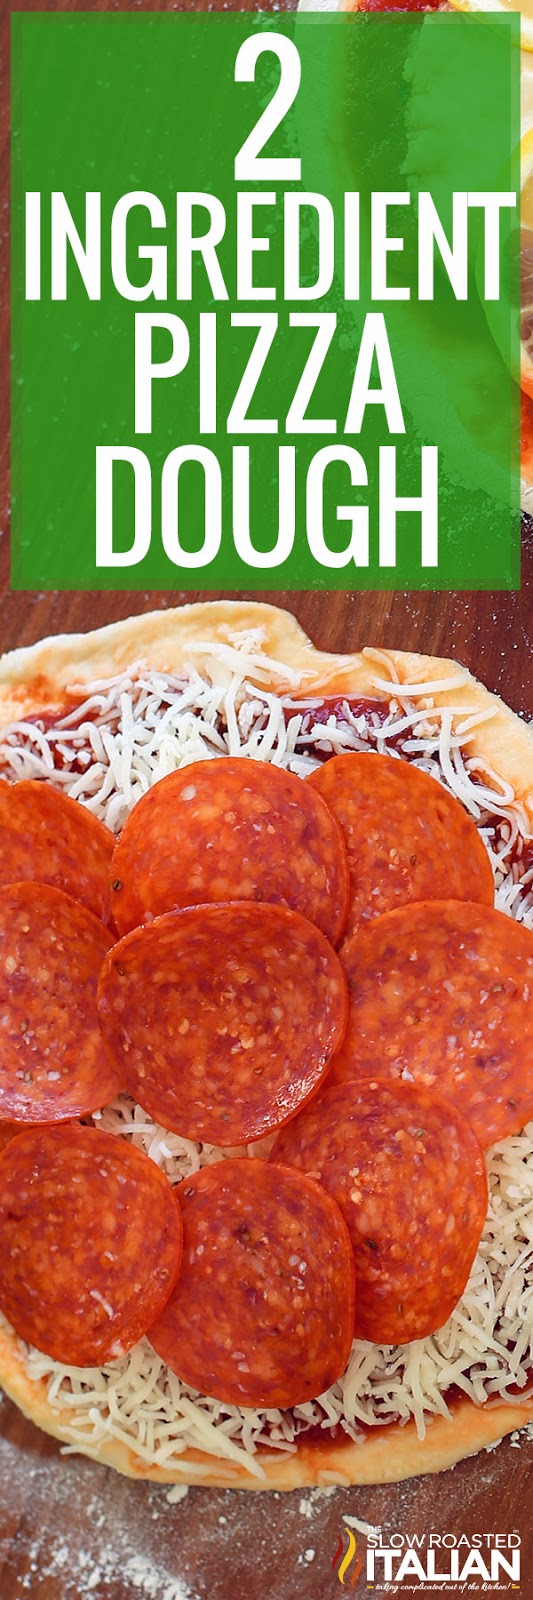 2-Ingredient Pizza Dough (With Video)